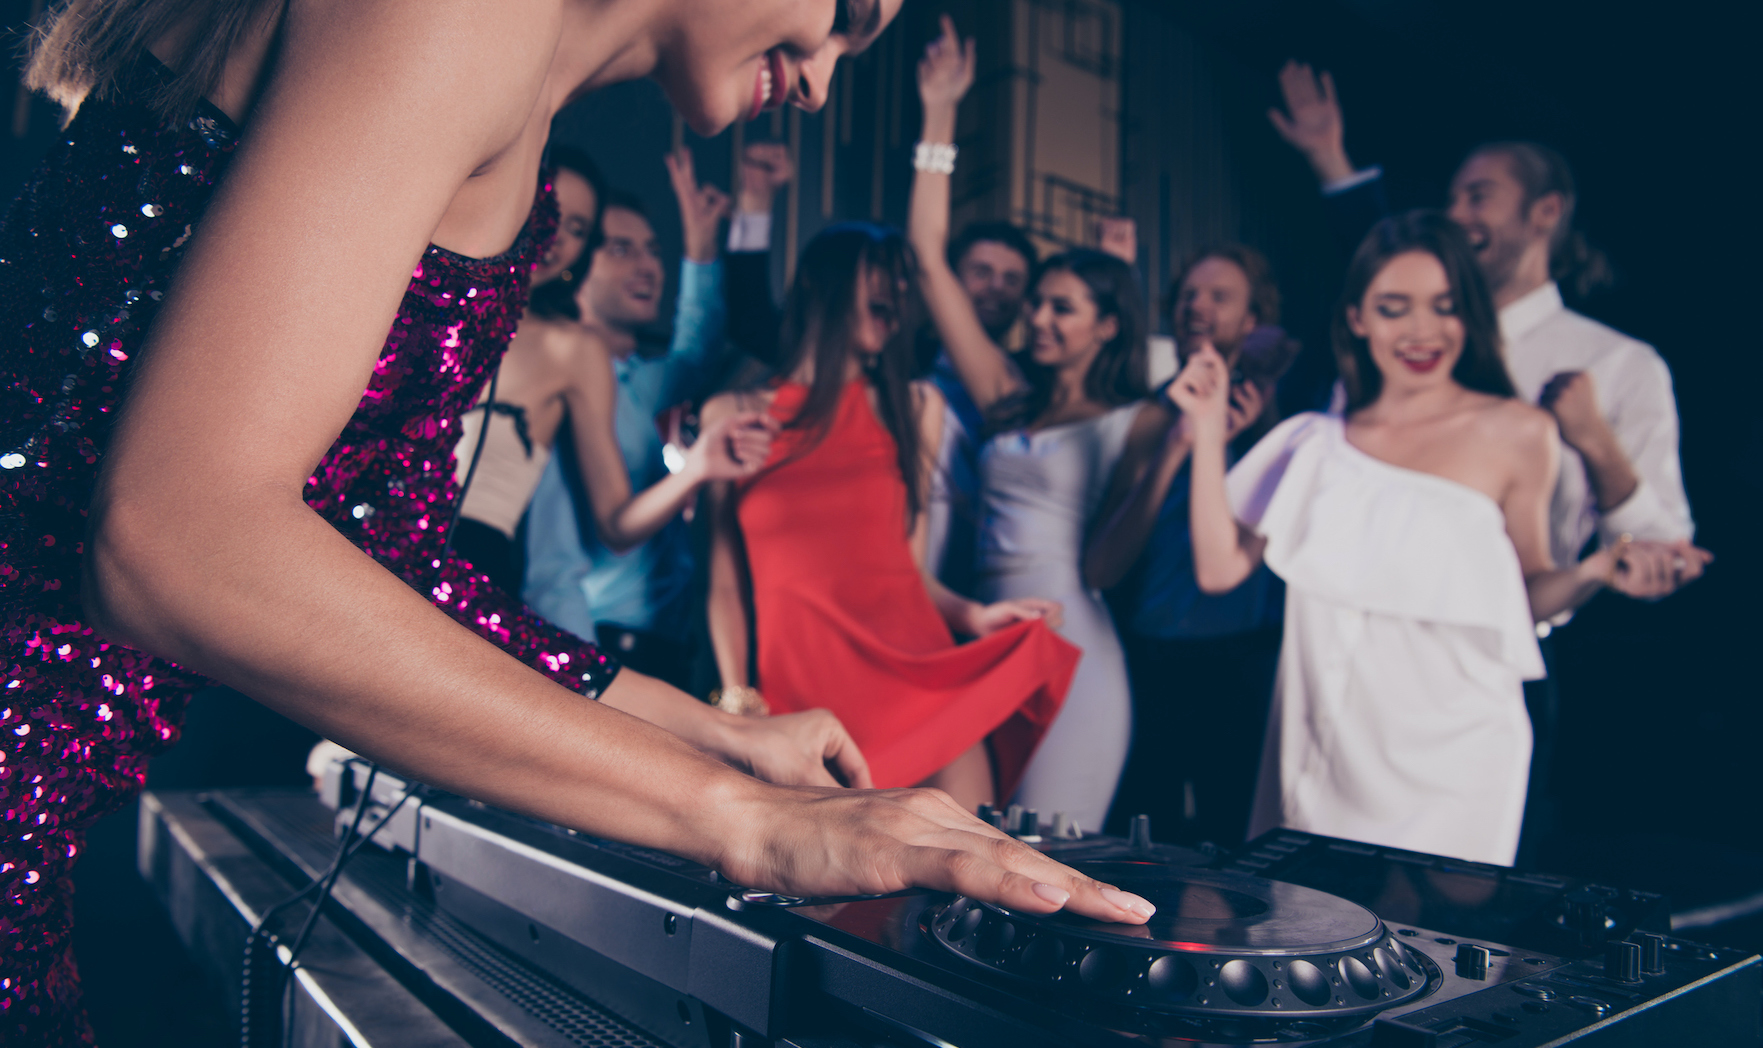 Cropped photo of lady dj play sound on corporate, feast, festive using djs mixing console control against blured background with fancy crowd (Cropped photo of lady dj play sound on corporate, feast, festive using djs mixing console control against blu